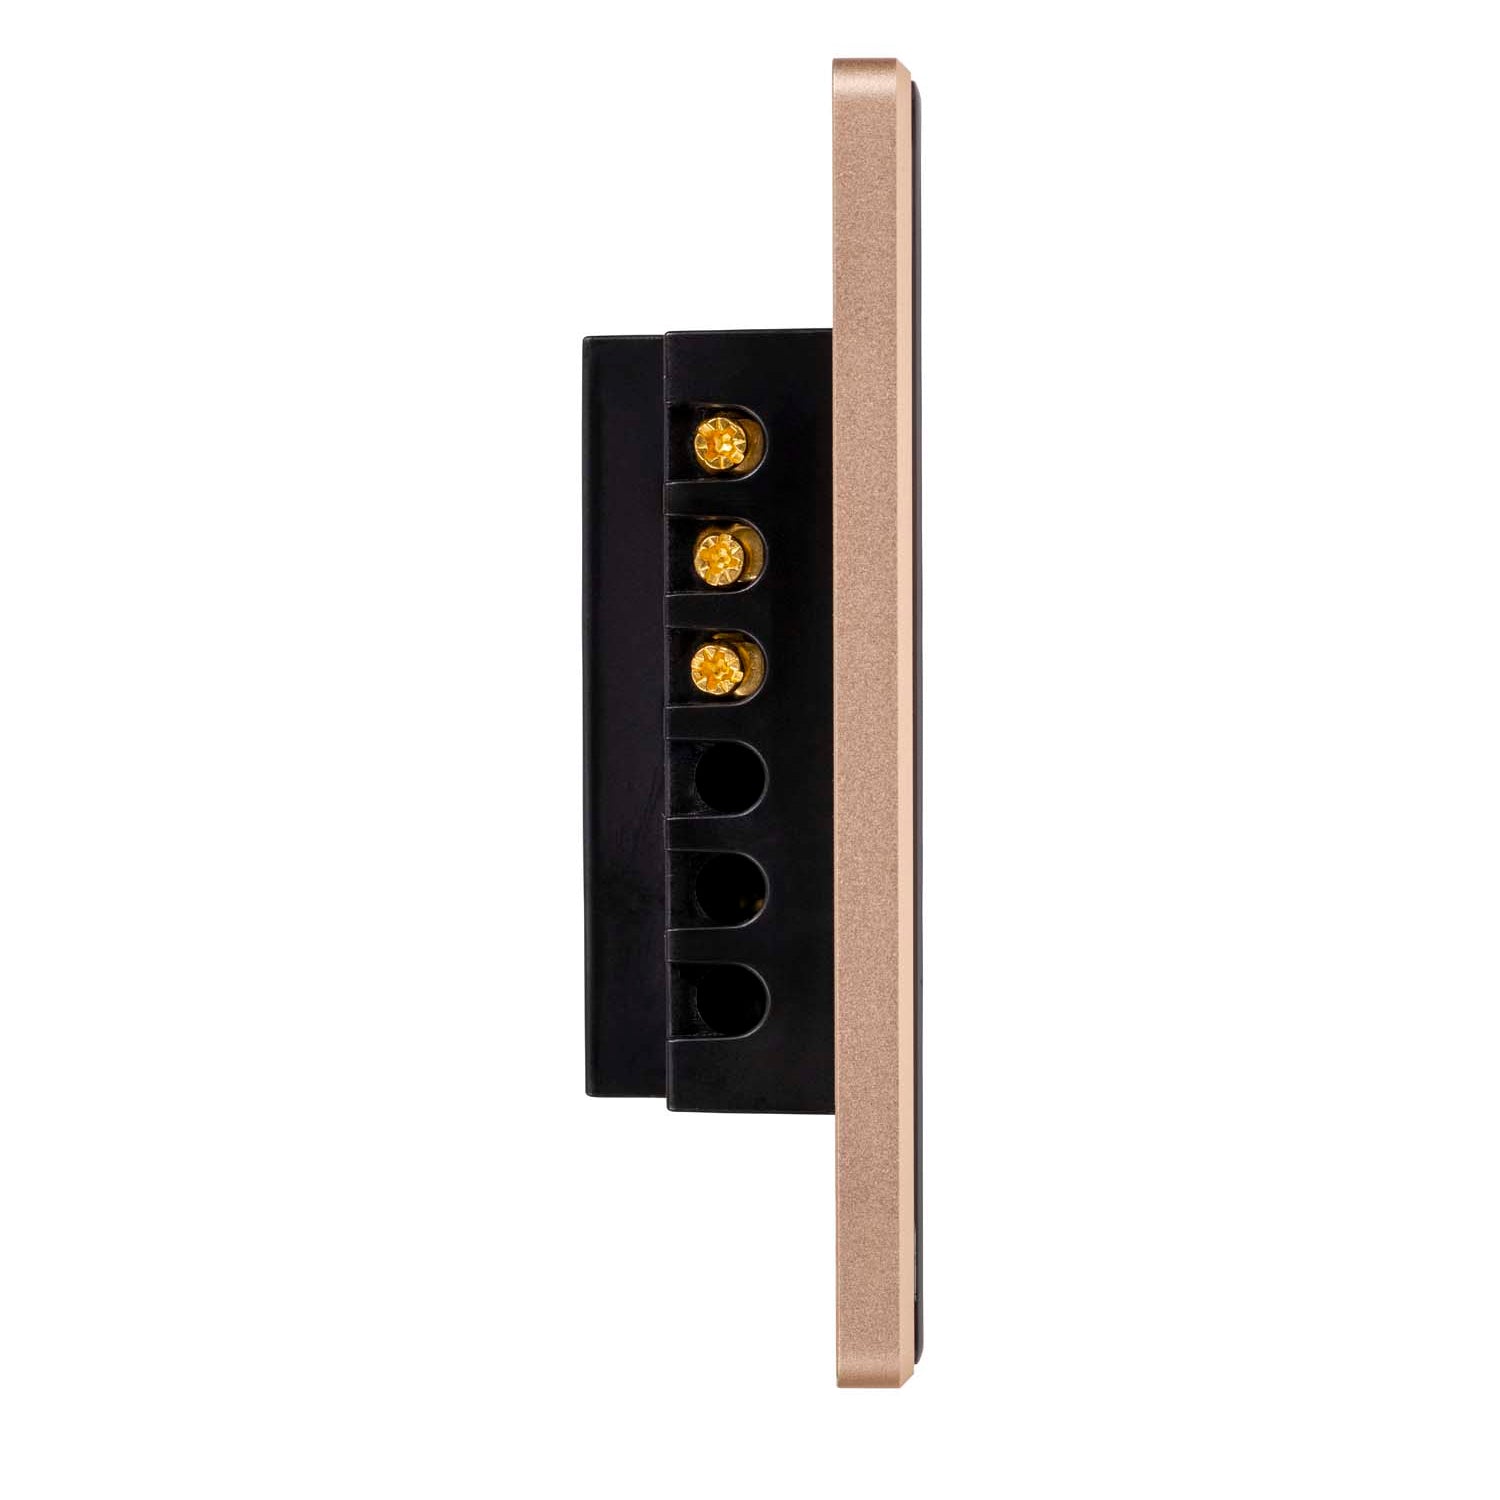 HV9220-1 - Wifi Single Gang Black with Gold Trim Wall Switch